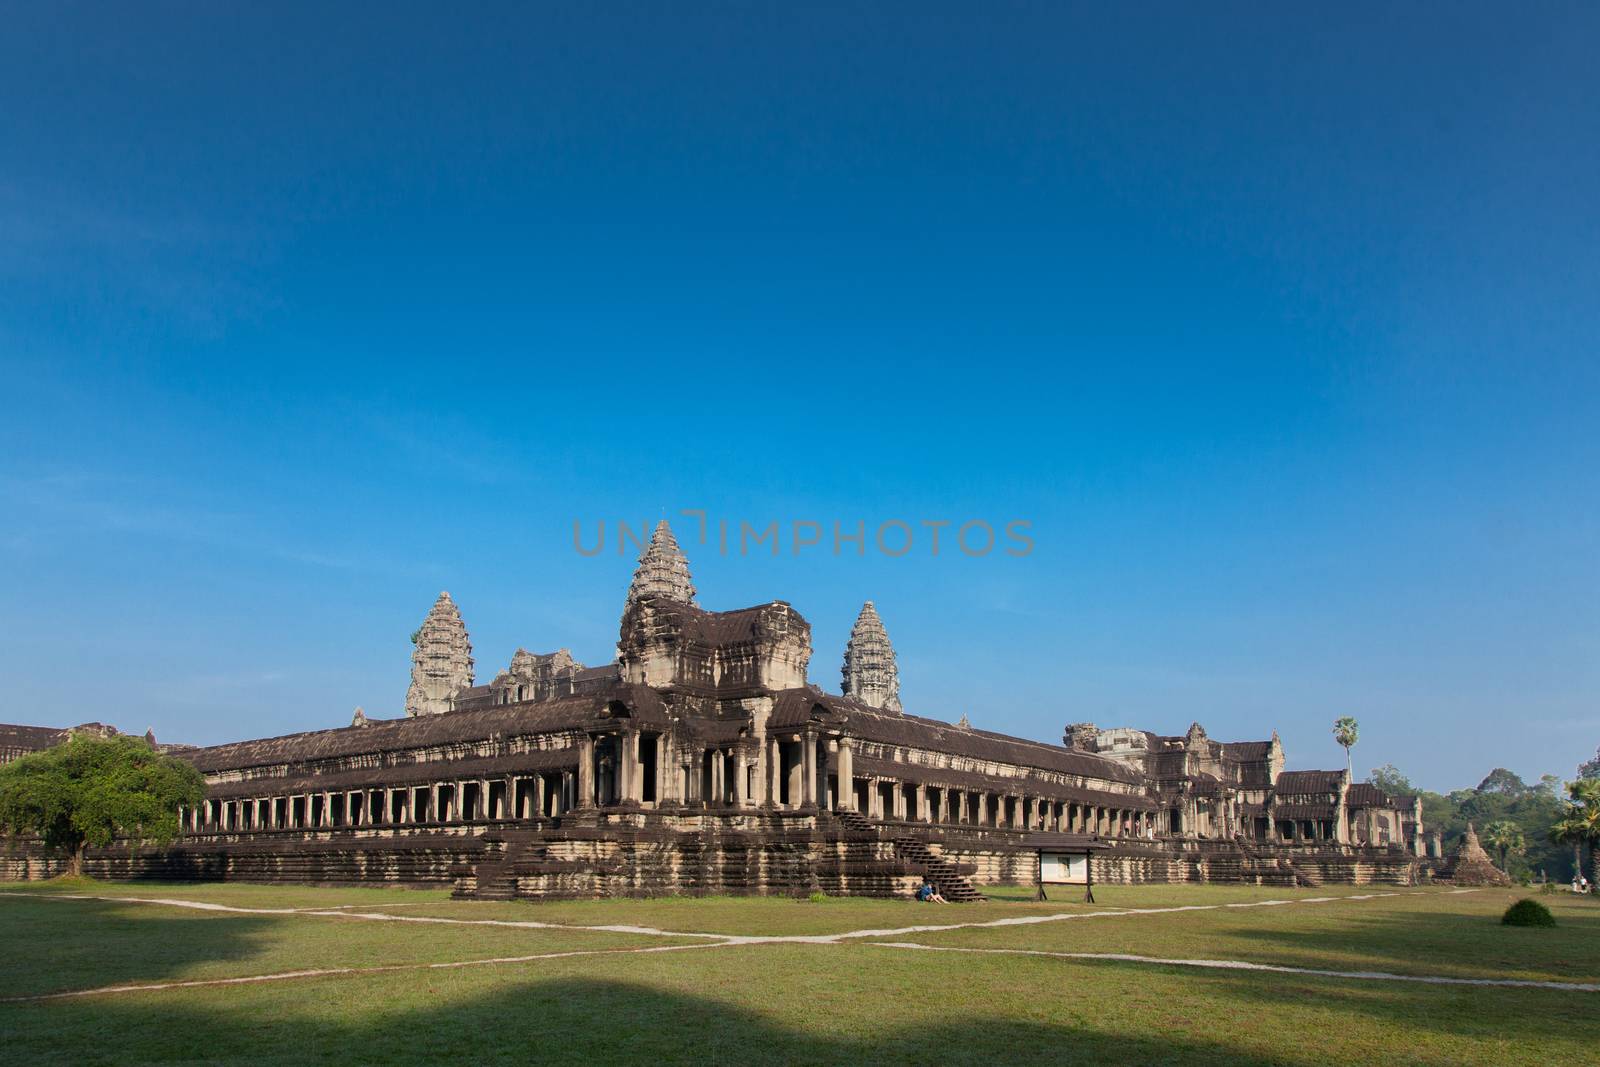 The huge temple complex of Angkor Watt, Cambodia seen from the eastern corner, wide angle image with deep blue sky. High quality photo